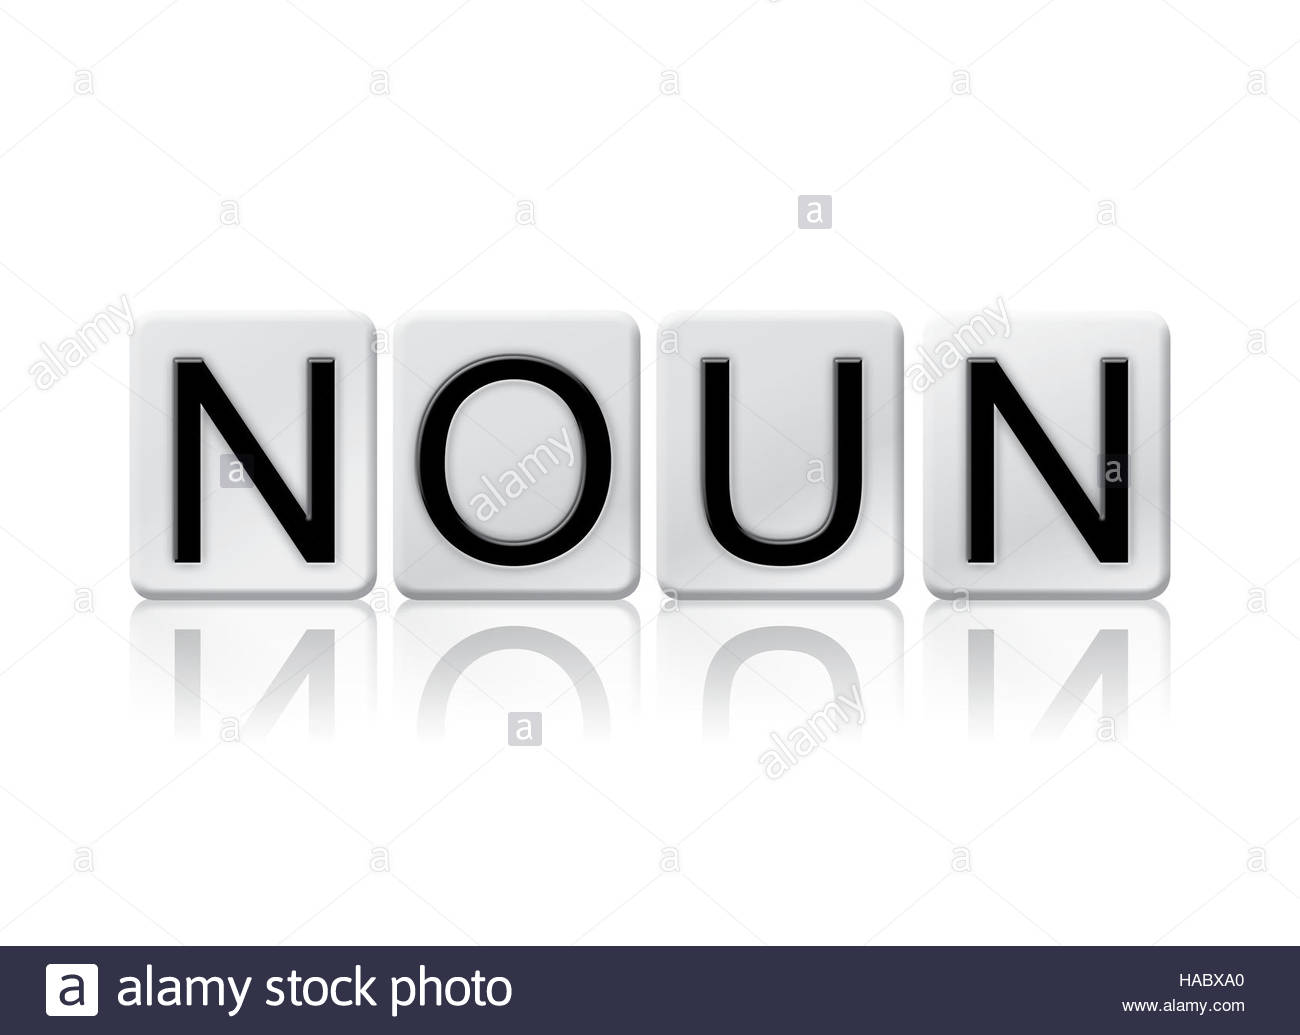 The Word Noun Written In Tile Letters Isolated On A White Stock